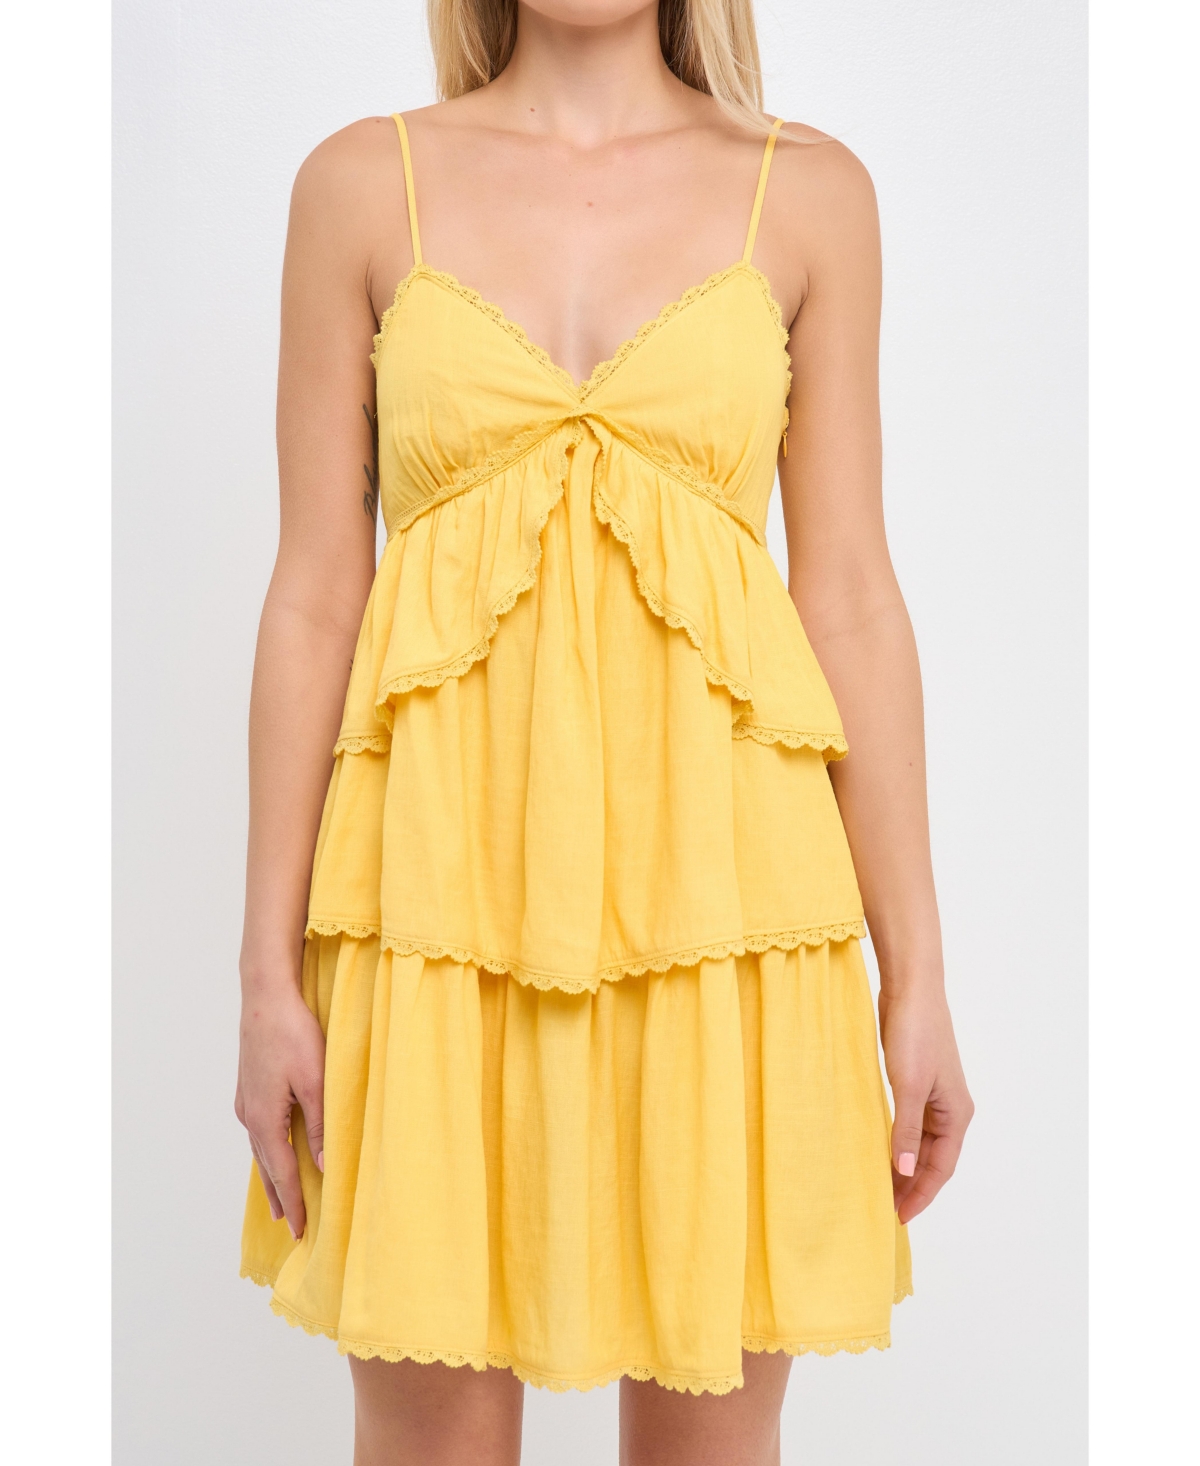 Women's Lace Trimmed Cascade Tiered Mini Dress - Yellow